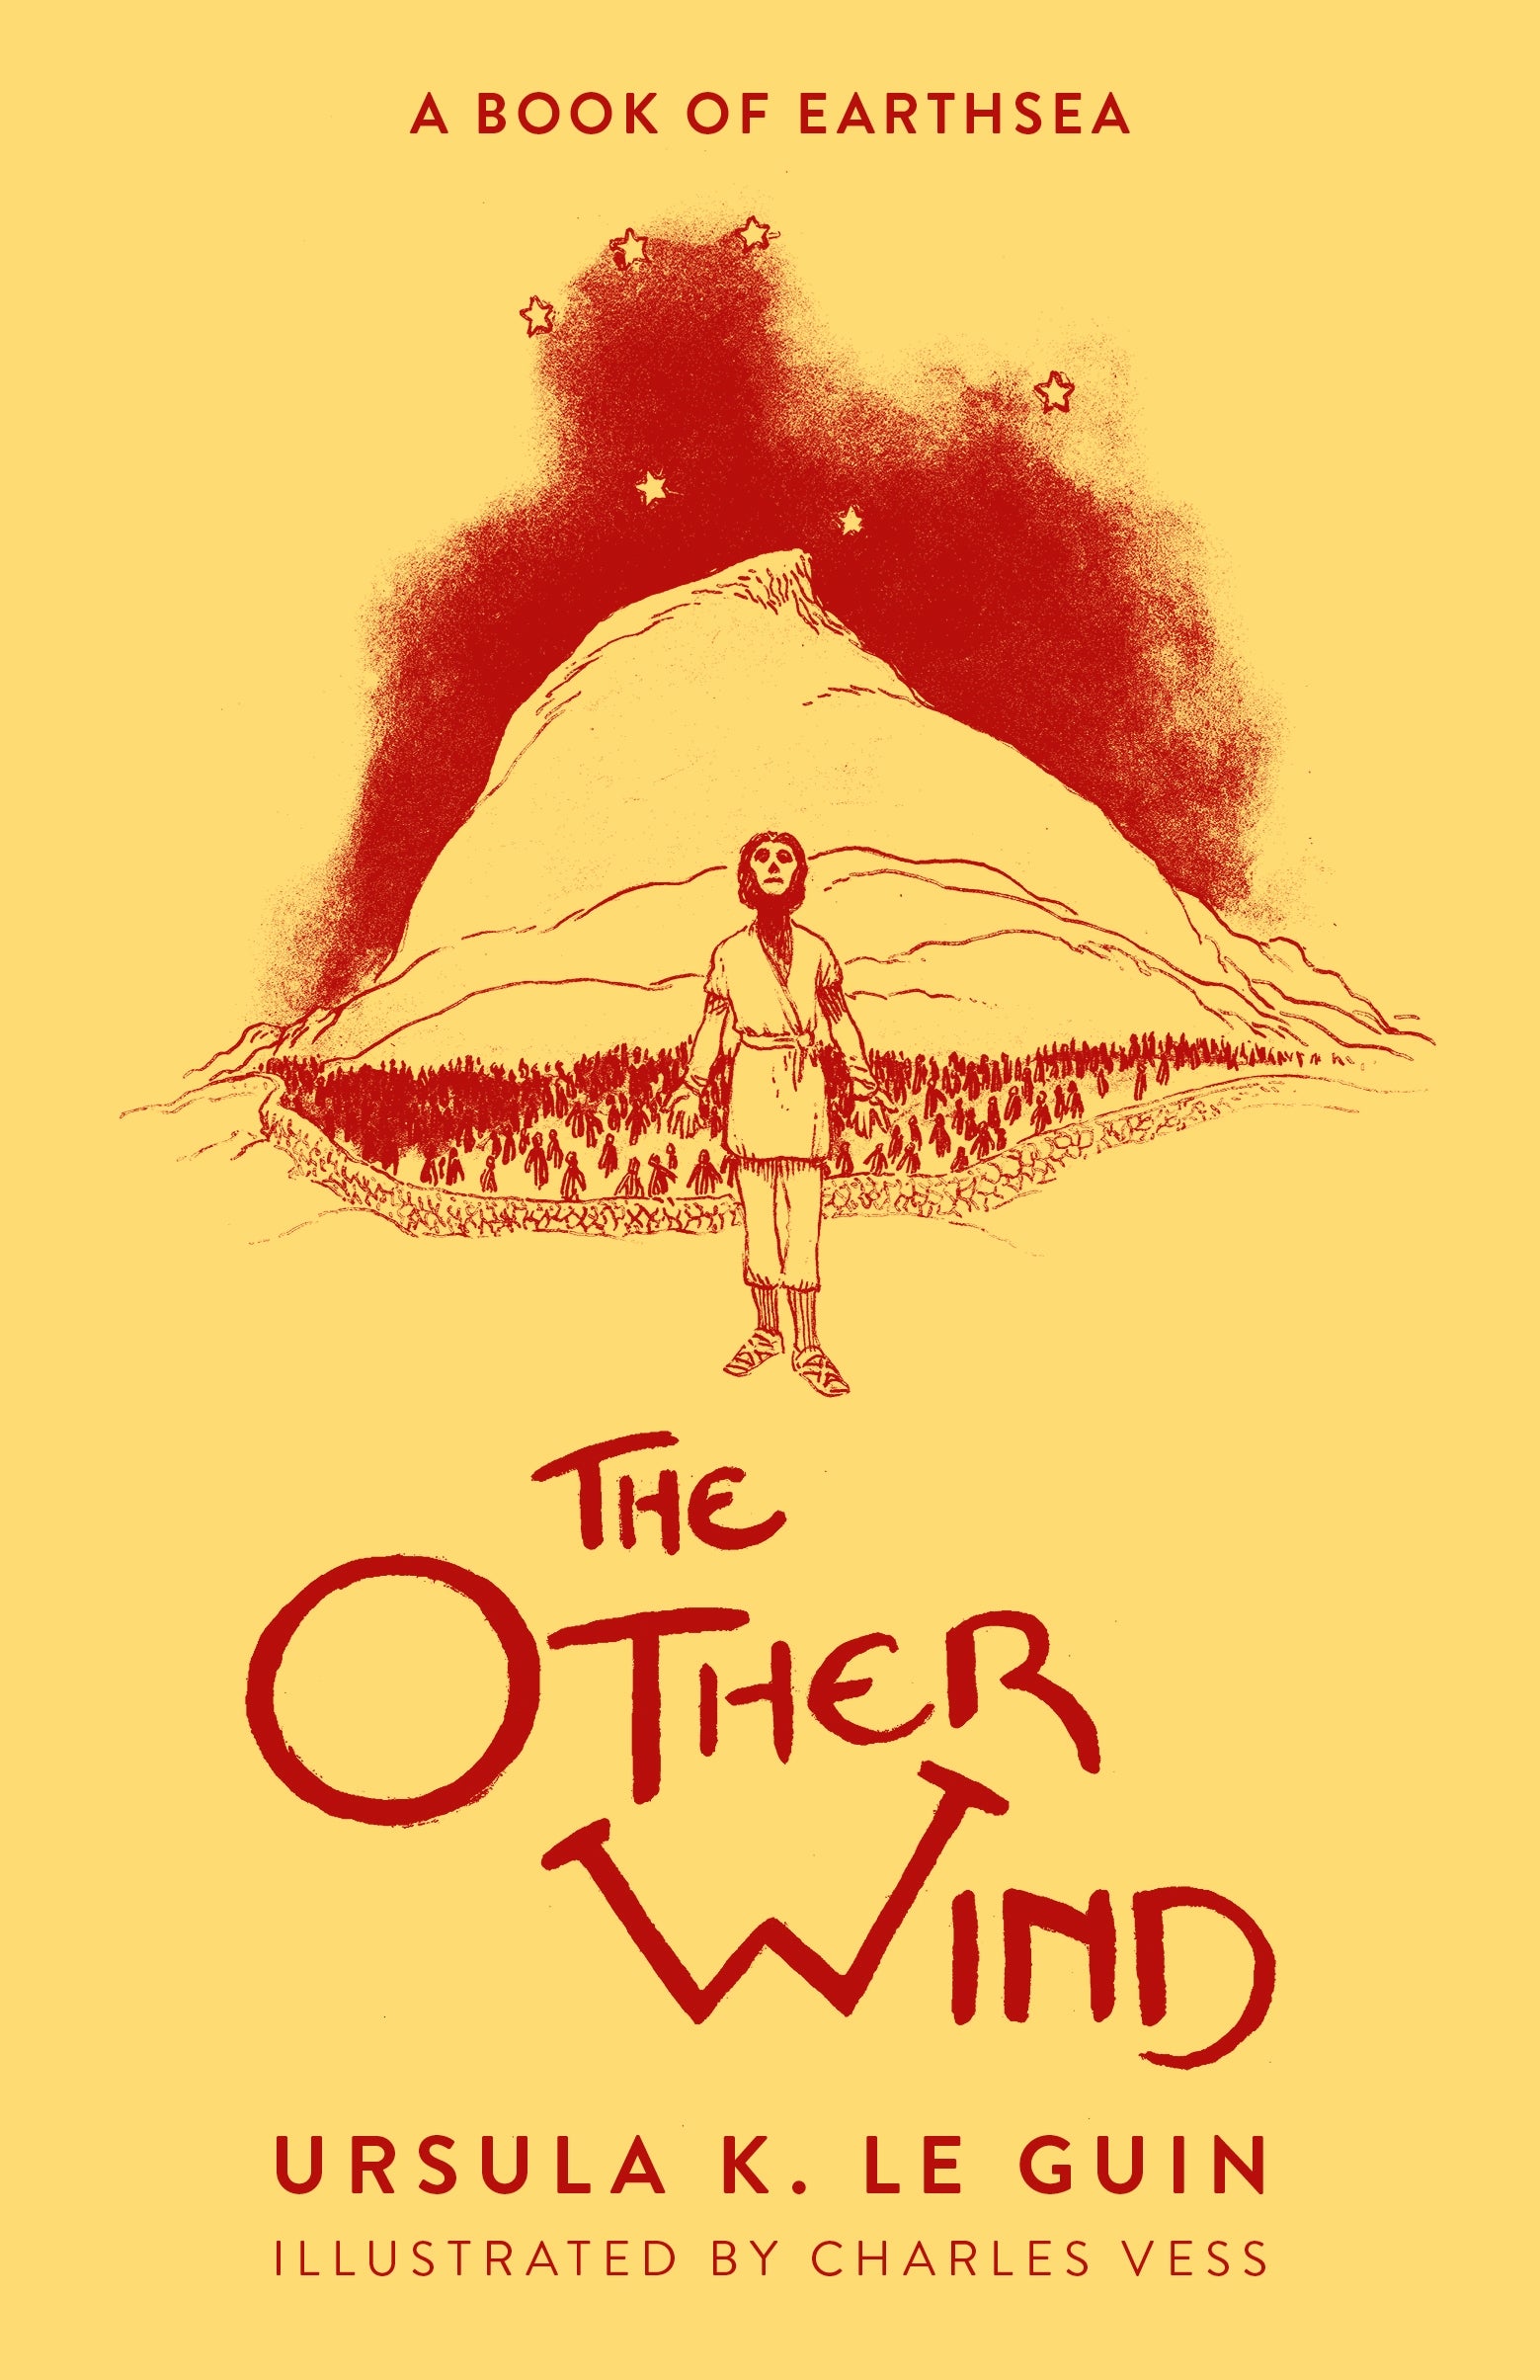 The Other Wind by Ursula K. Le Guin